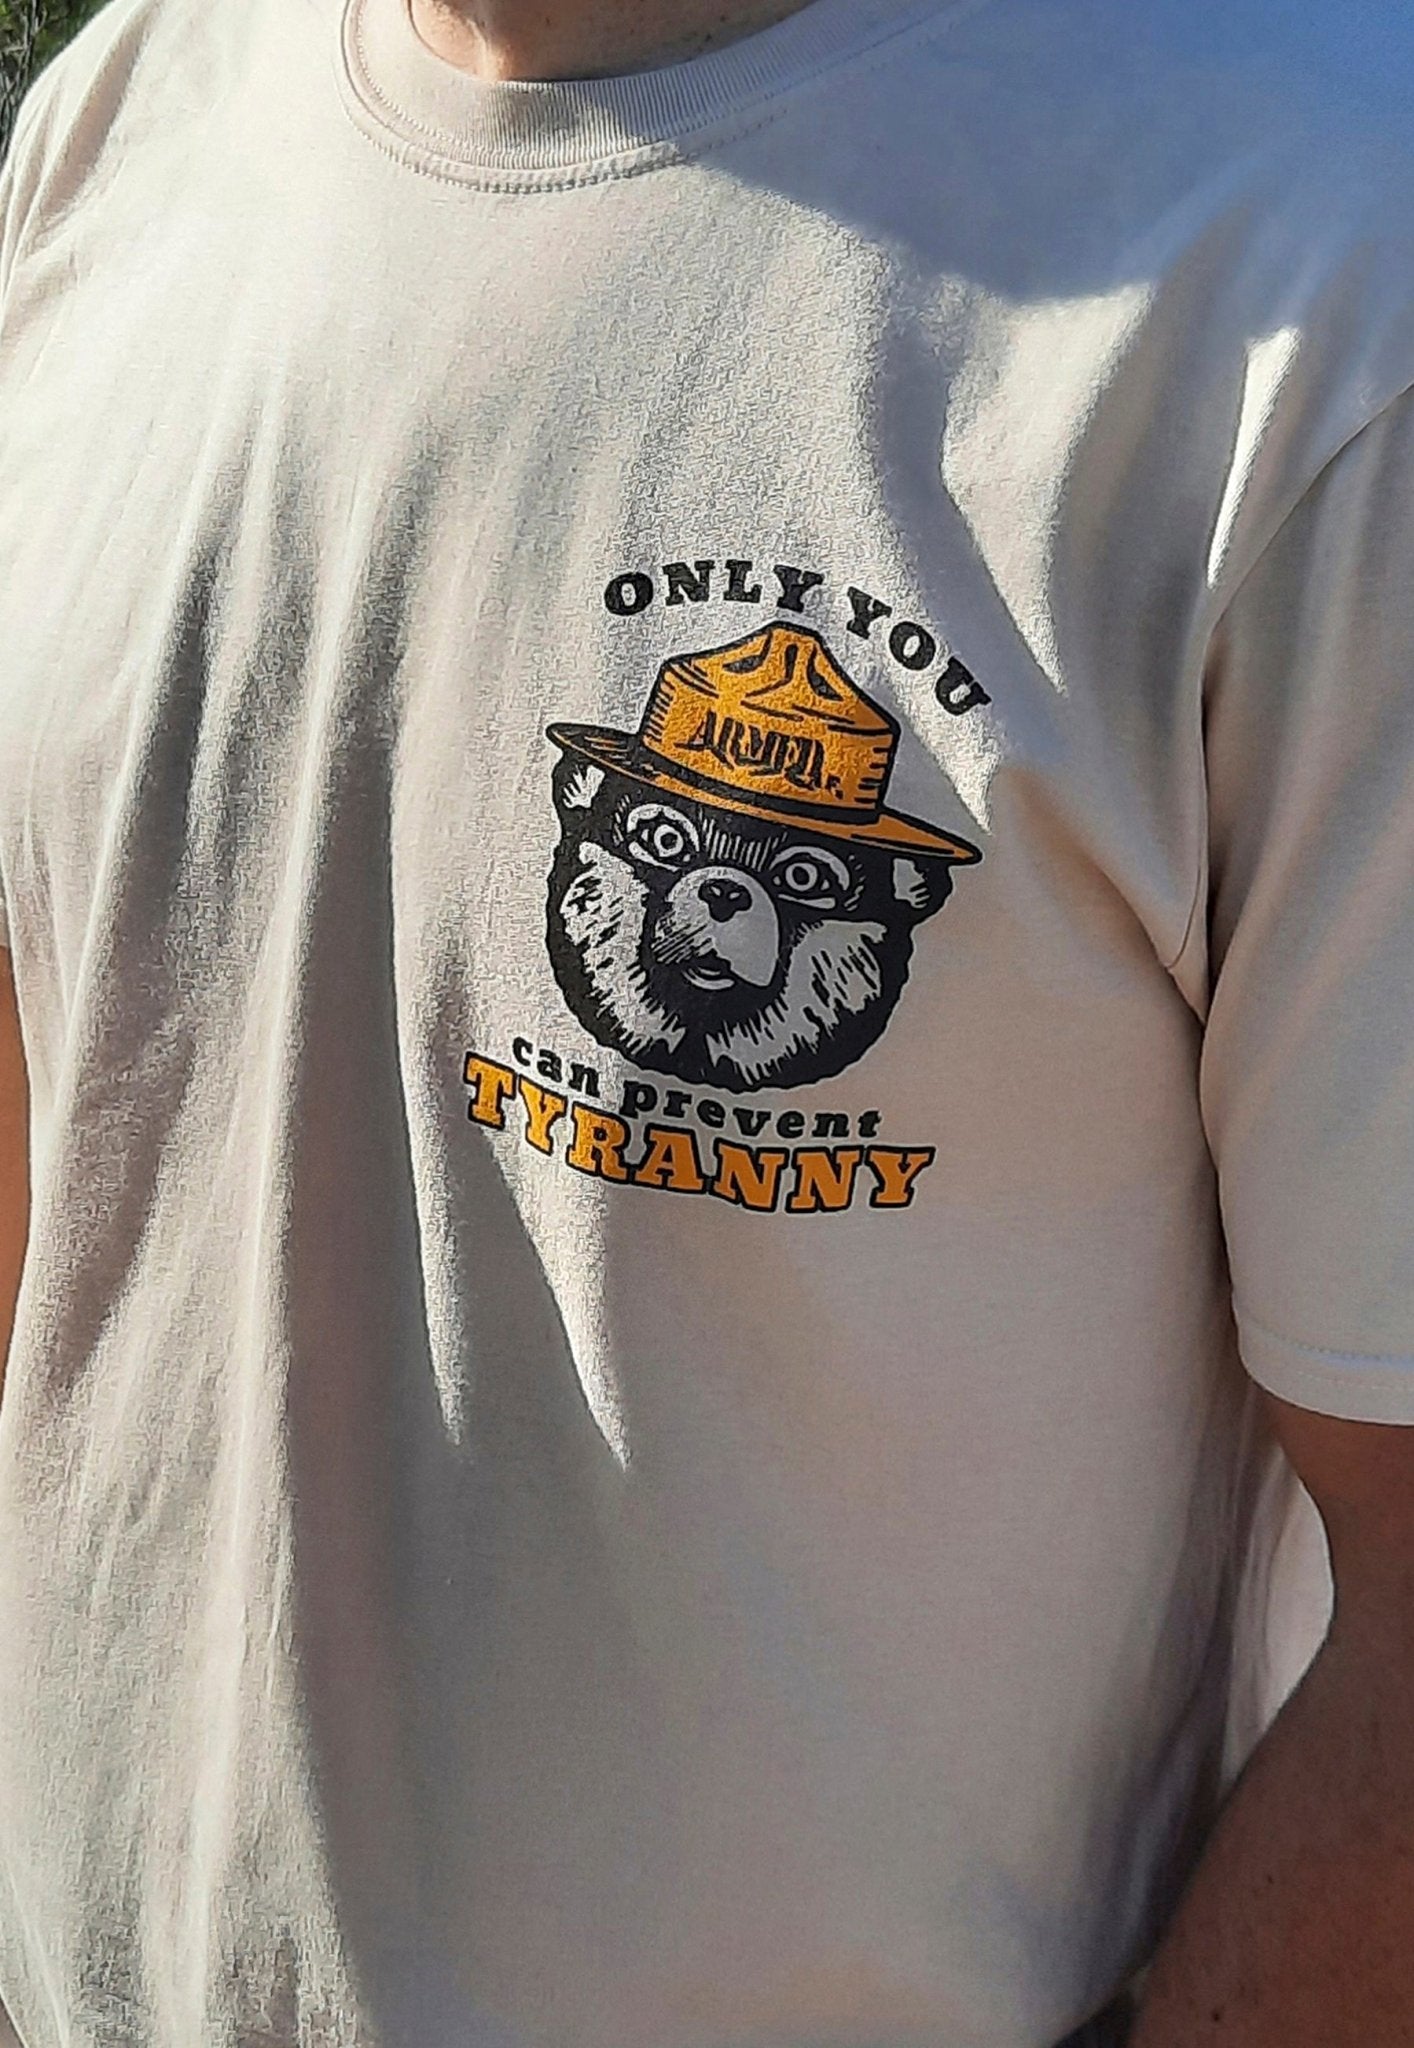 Only You can Prevent Tyranny t-shirt - ArmedAF